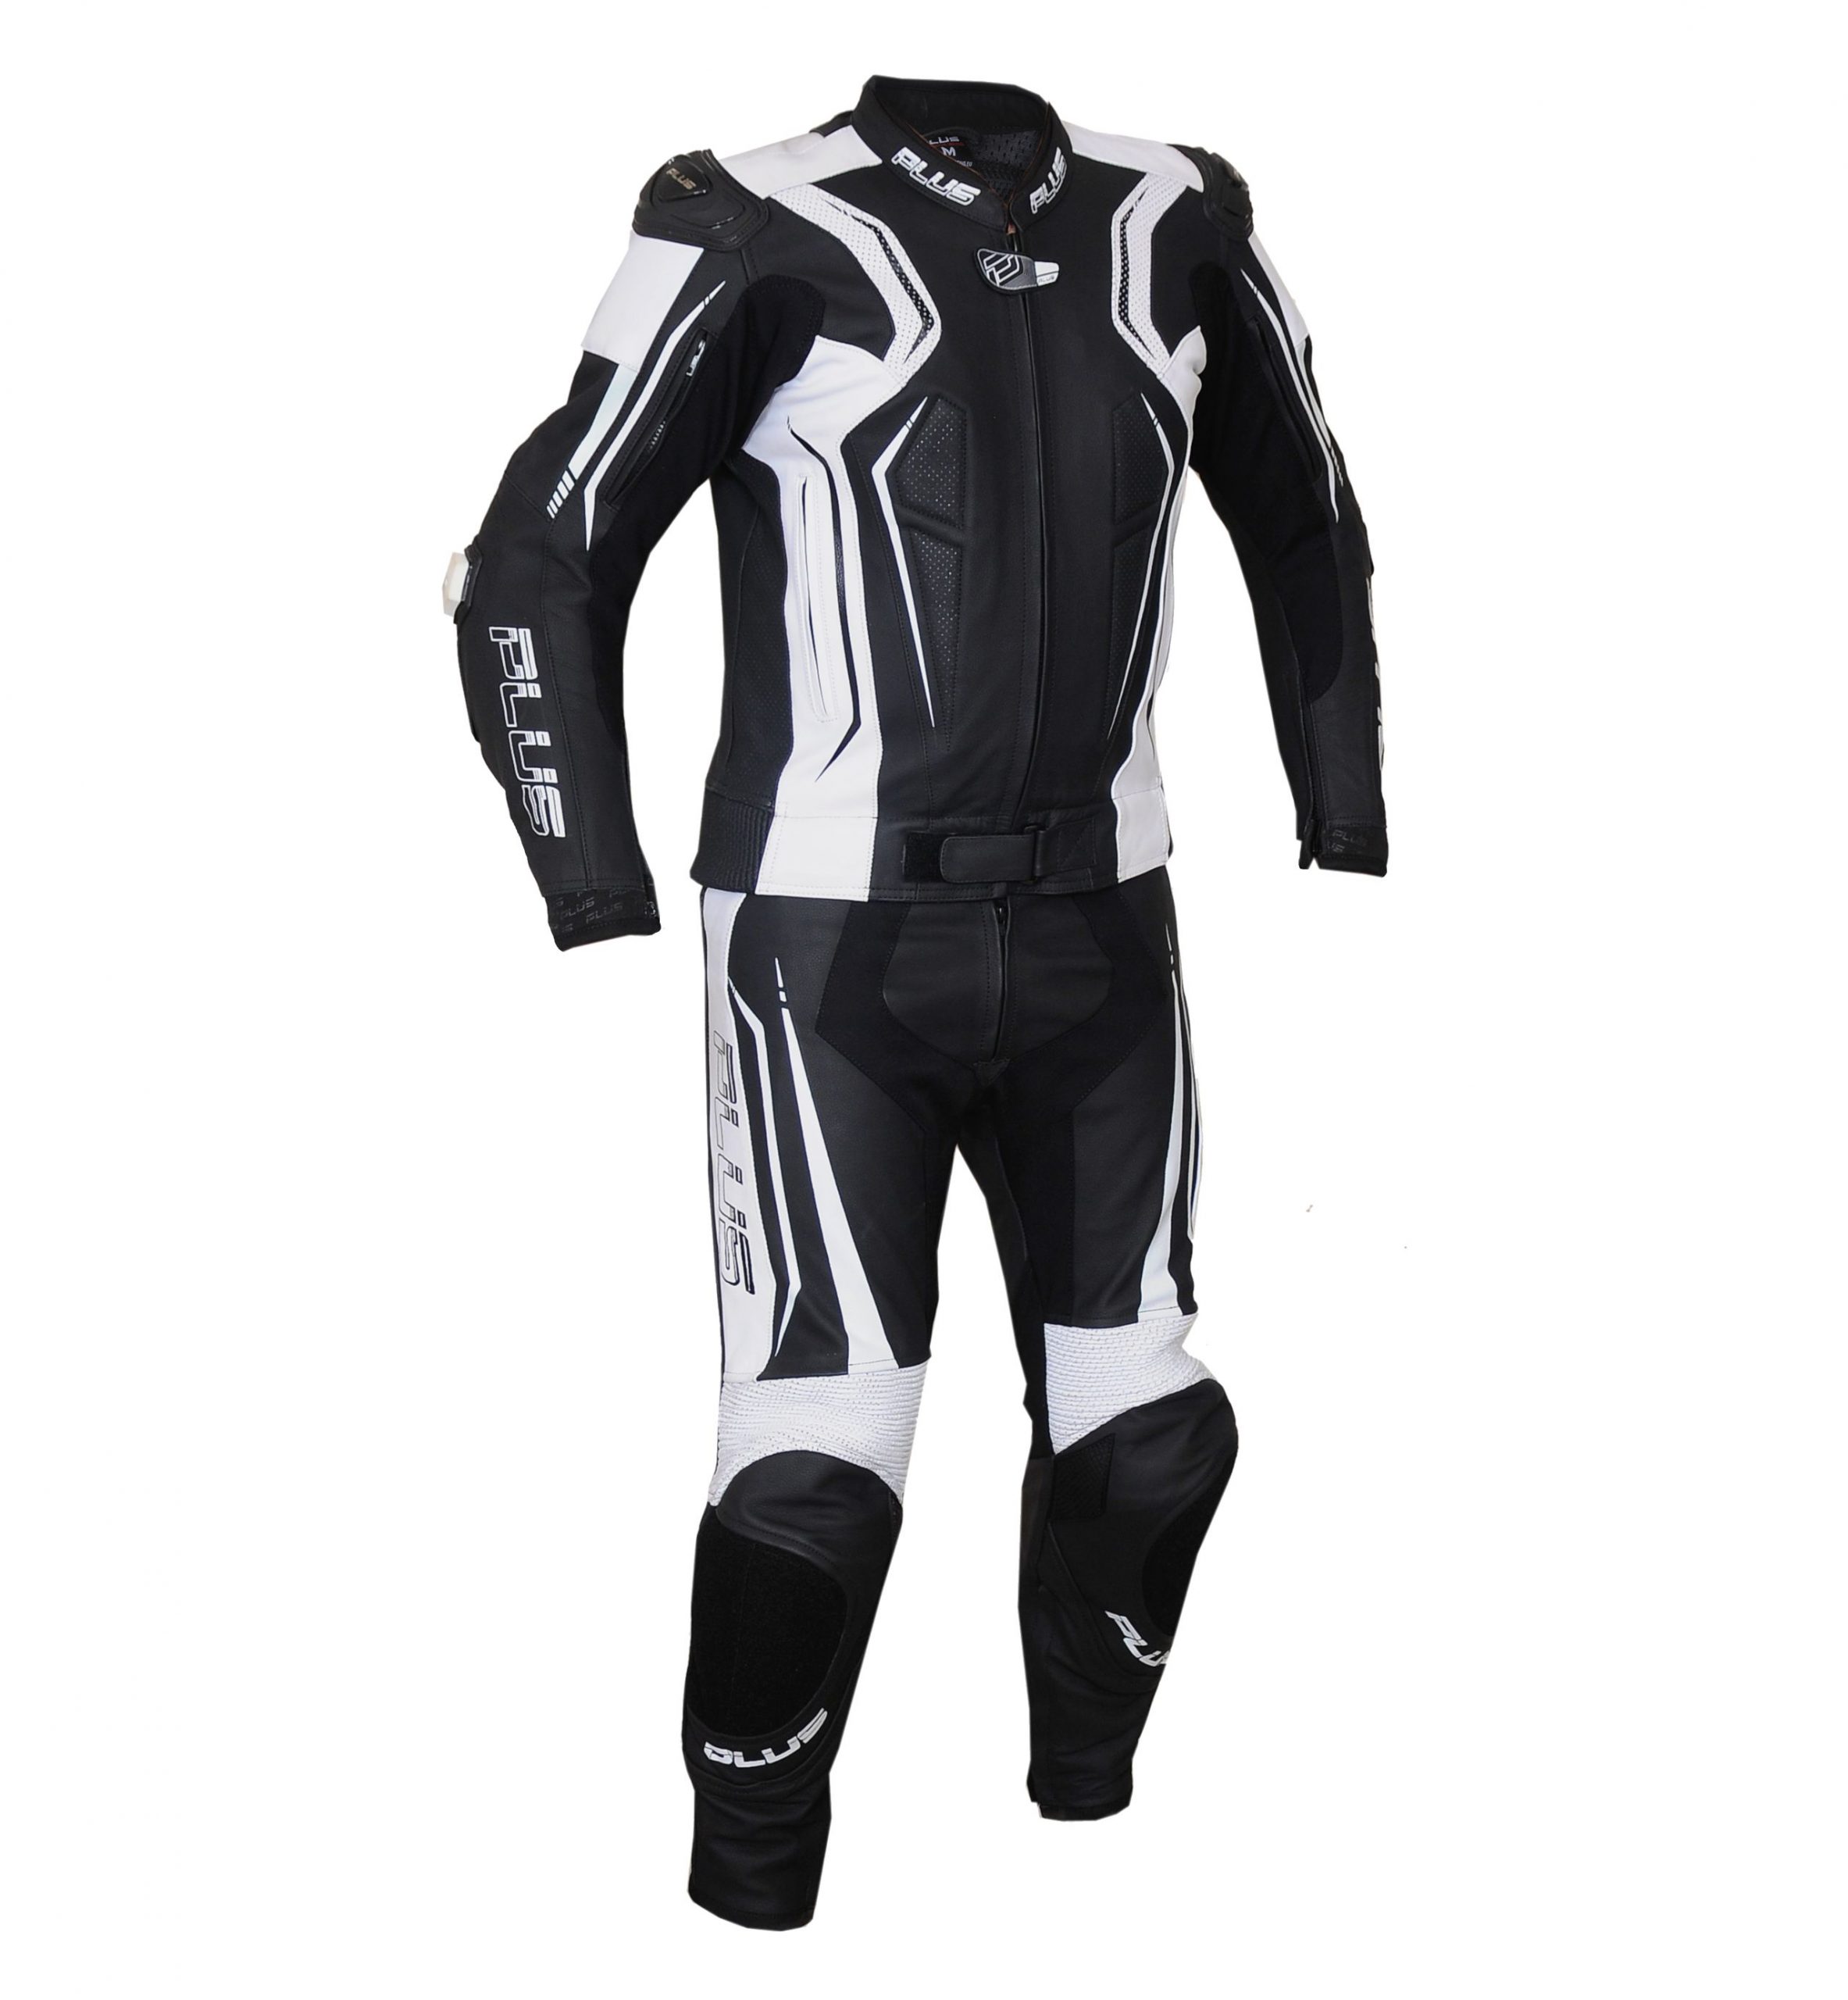 Motorcycle Leather Suit's Size Measurement Guide